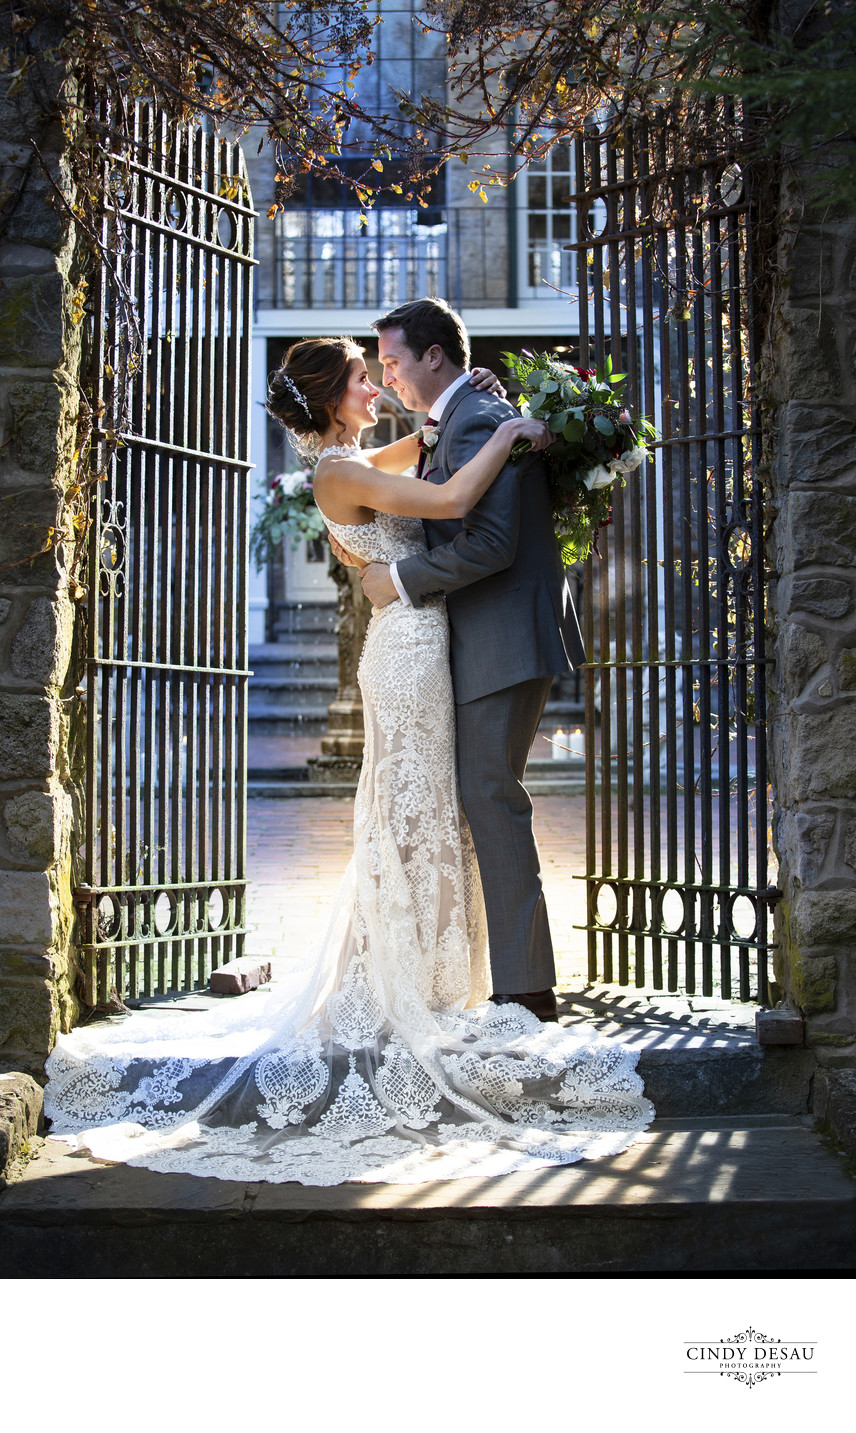 Antique Iron Gates on the Historic Holly Hedge Courtyard: The Perfect Spot for Your Wedding Portraits. 